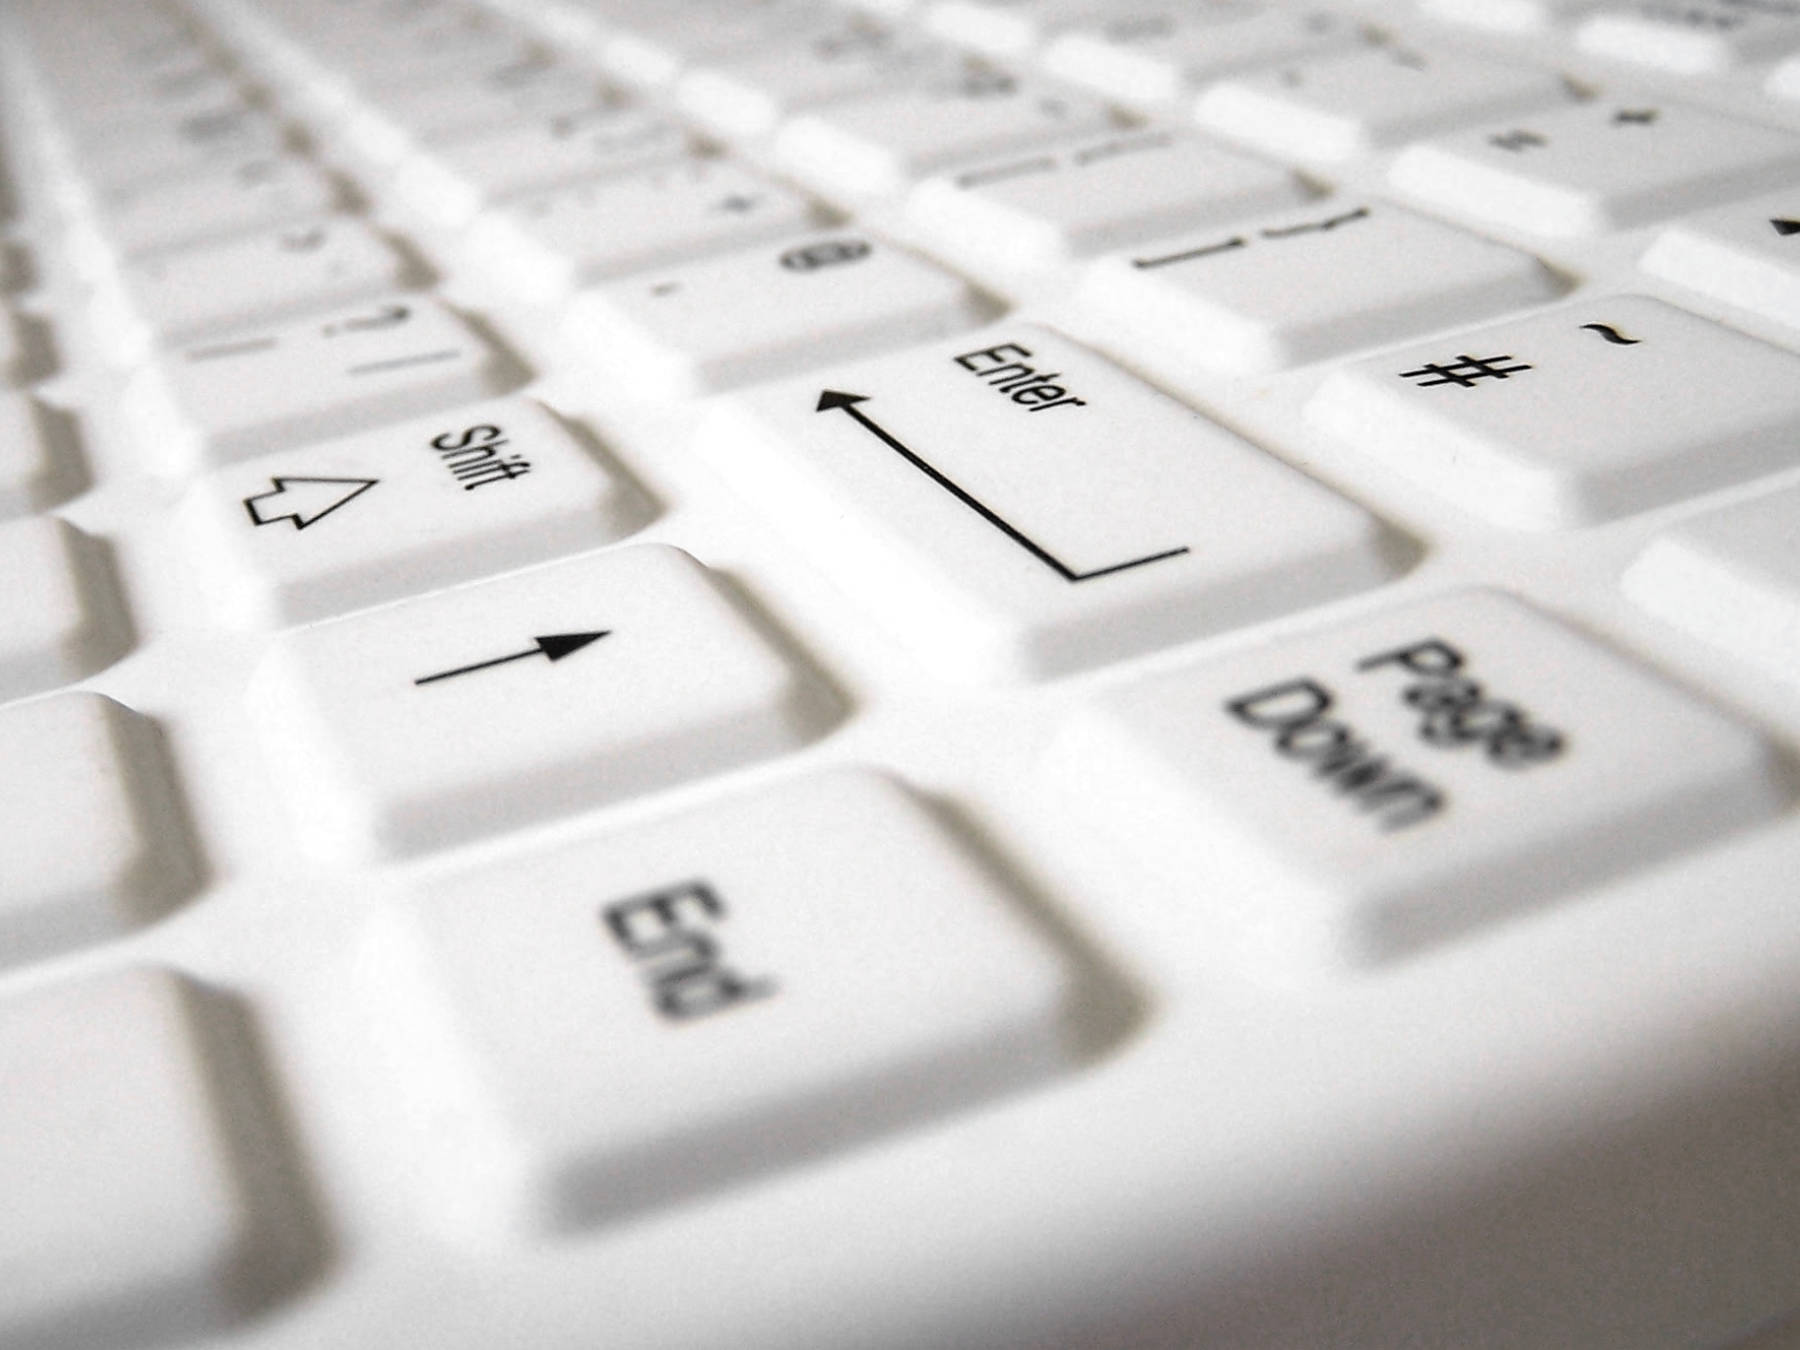 Wipeable and Washable Keyboards: What's the difference?